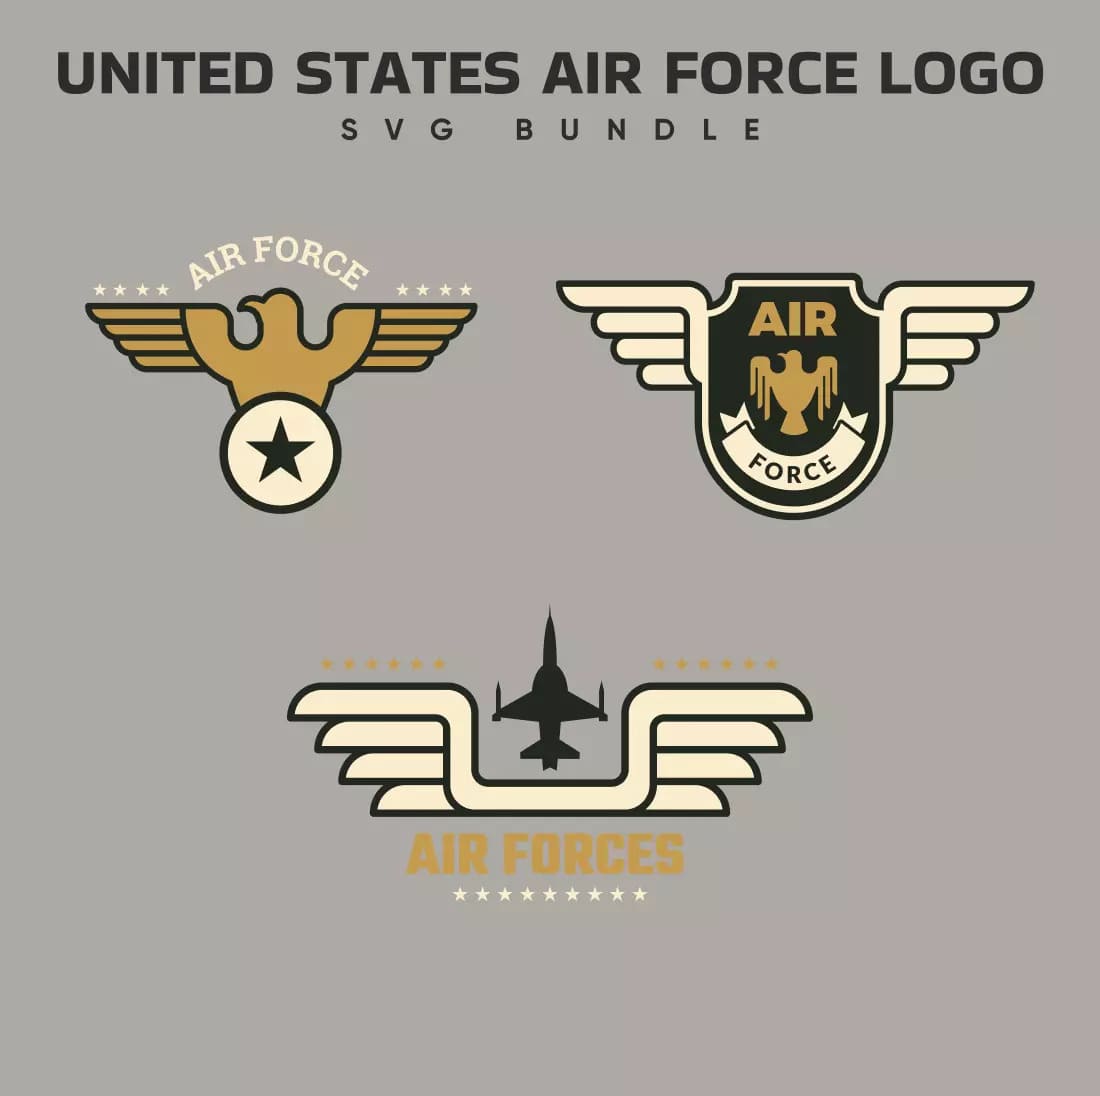 United States Air Force Logo SVG Bundle Preview.